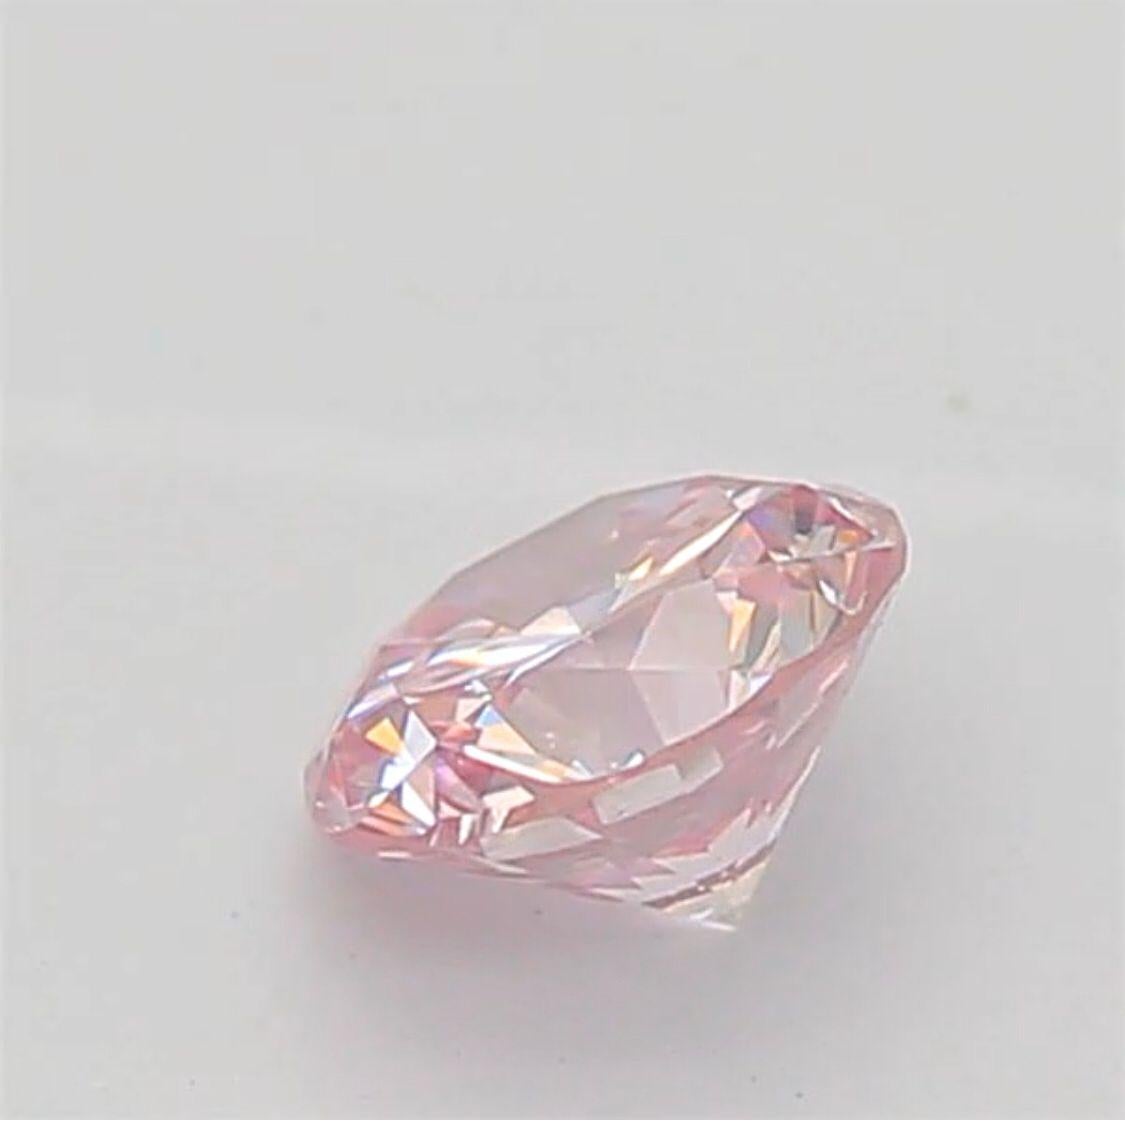 0.20 Carat Very Light Pink Round Shaped Diamond VS1 Clarity CGL Certified For Sale 4